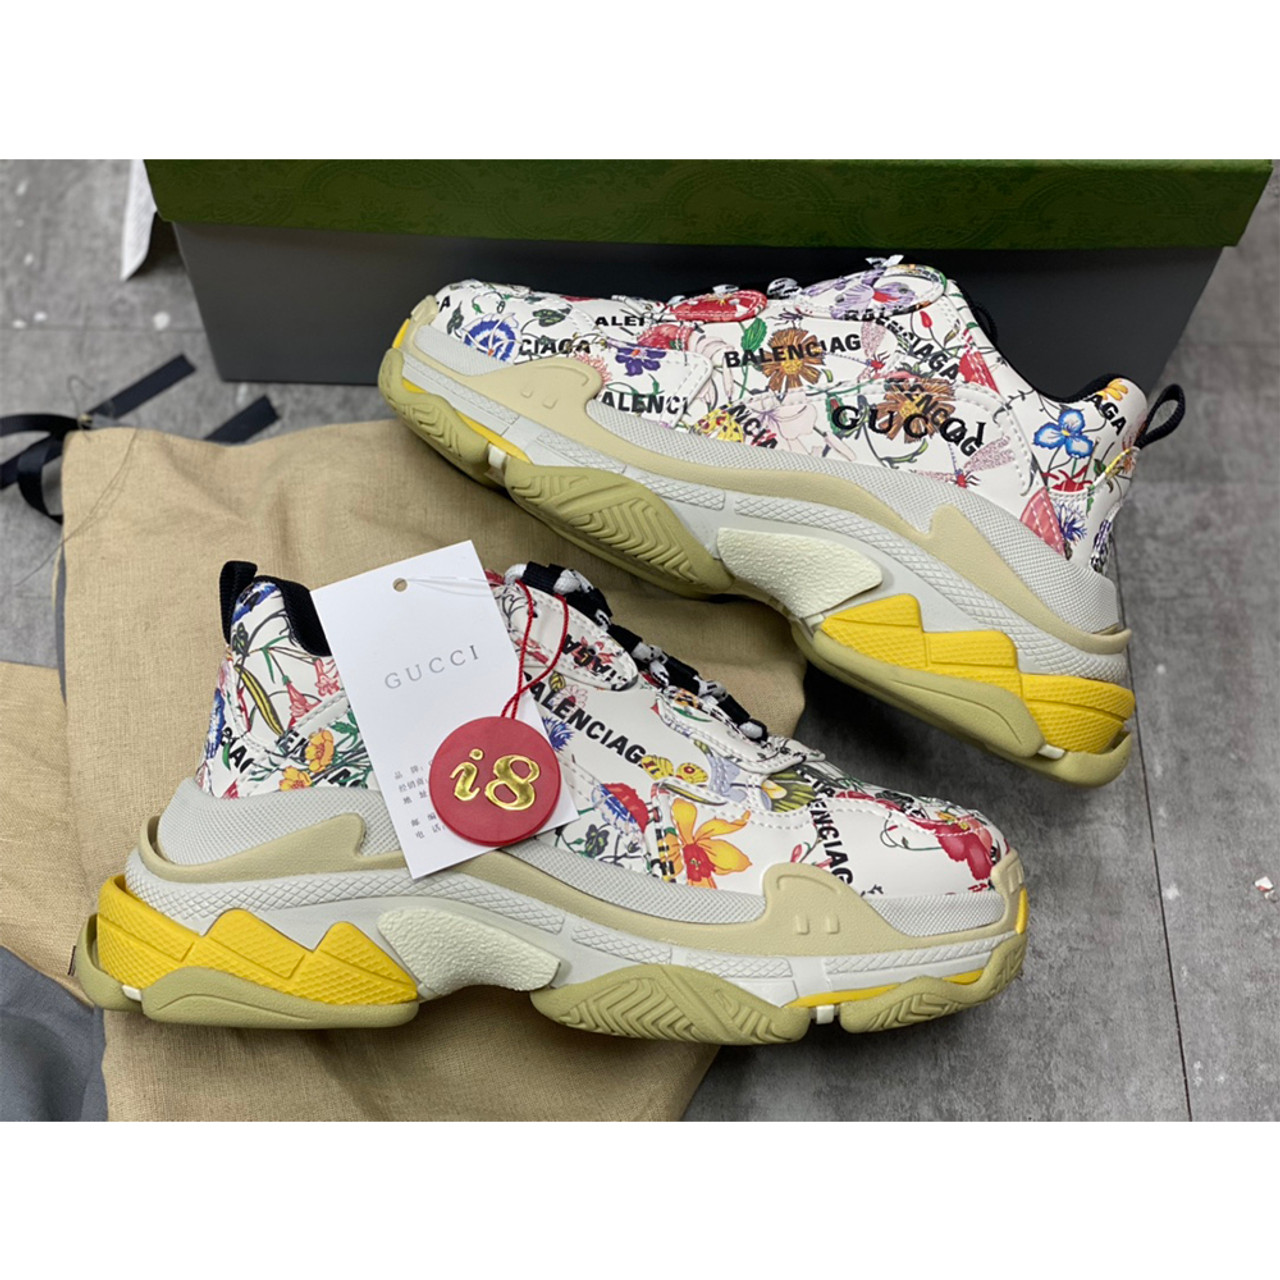 Wholesale Louis's Vuitton's Replica Lv's Balenciaga's Man Gucci's Designer  Nike's Jordan's 4 Factory in China Online Store Adidas's Shoes Yeezy  Branded Woman 3p - China Shoes and Branded Shoe price